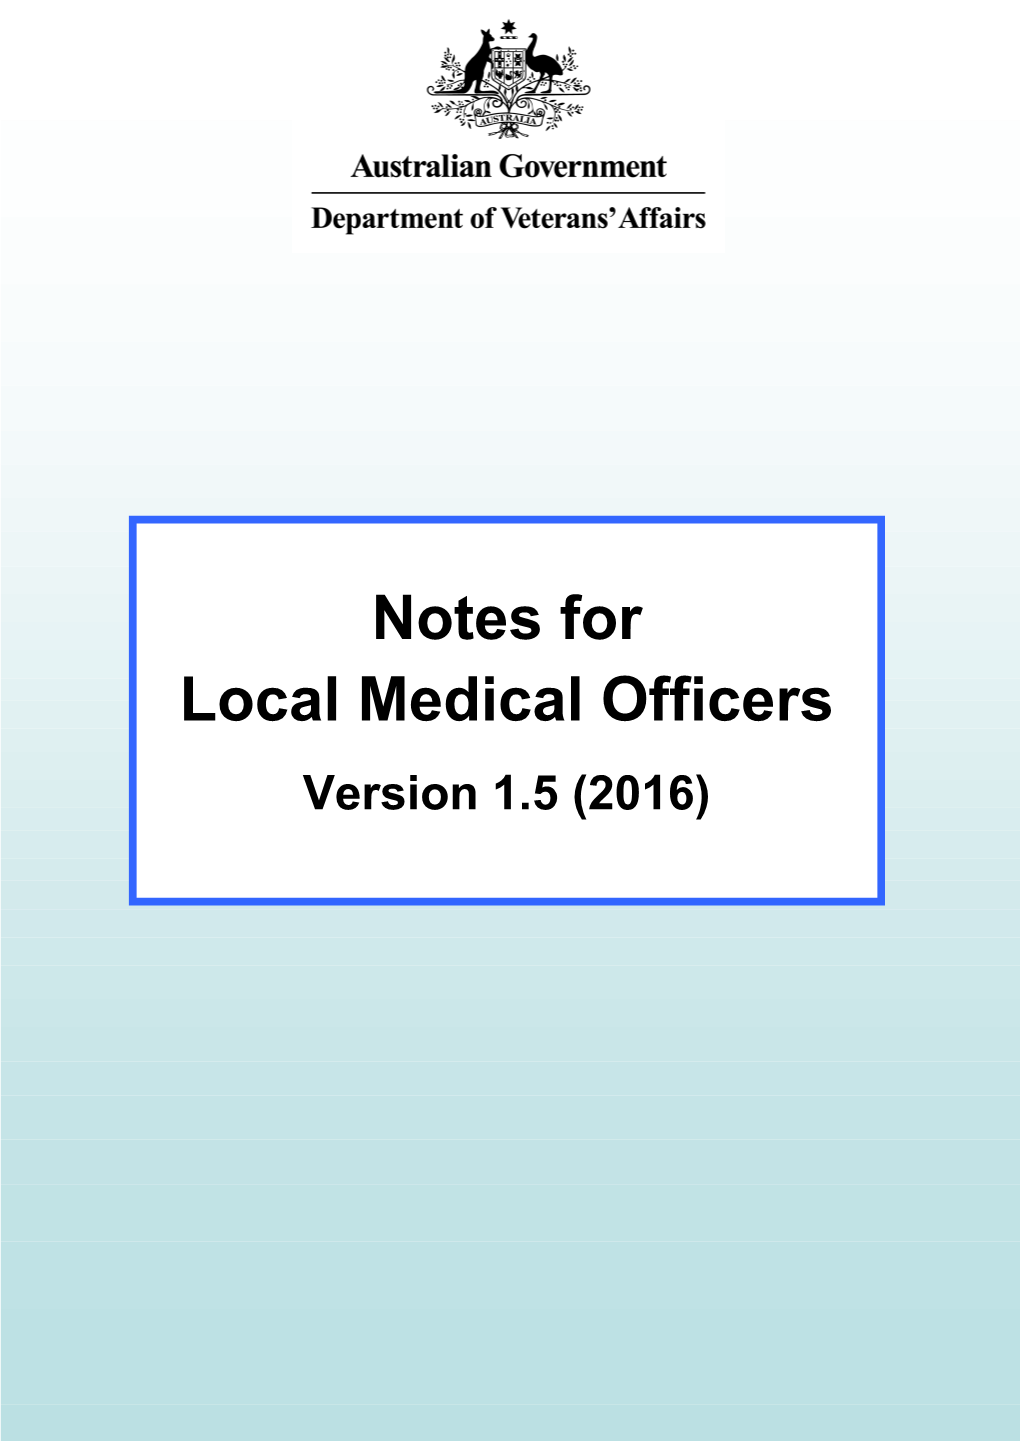 Notes for Local Medical Officers